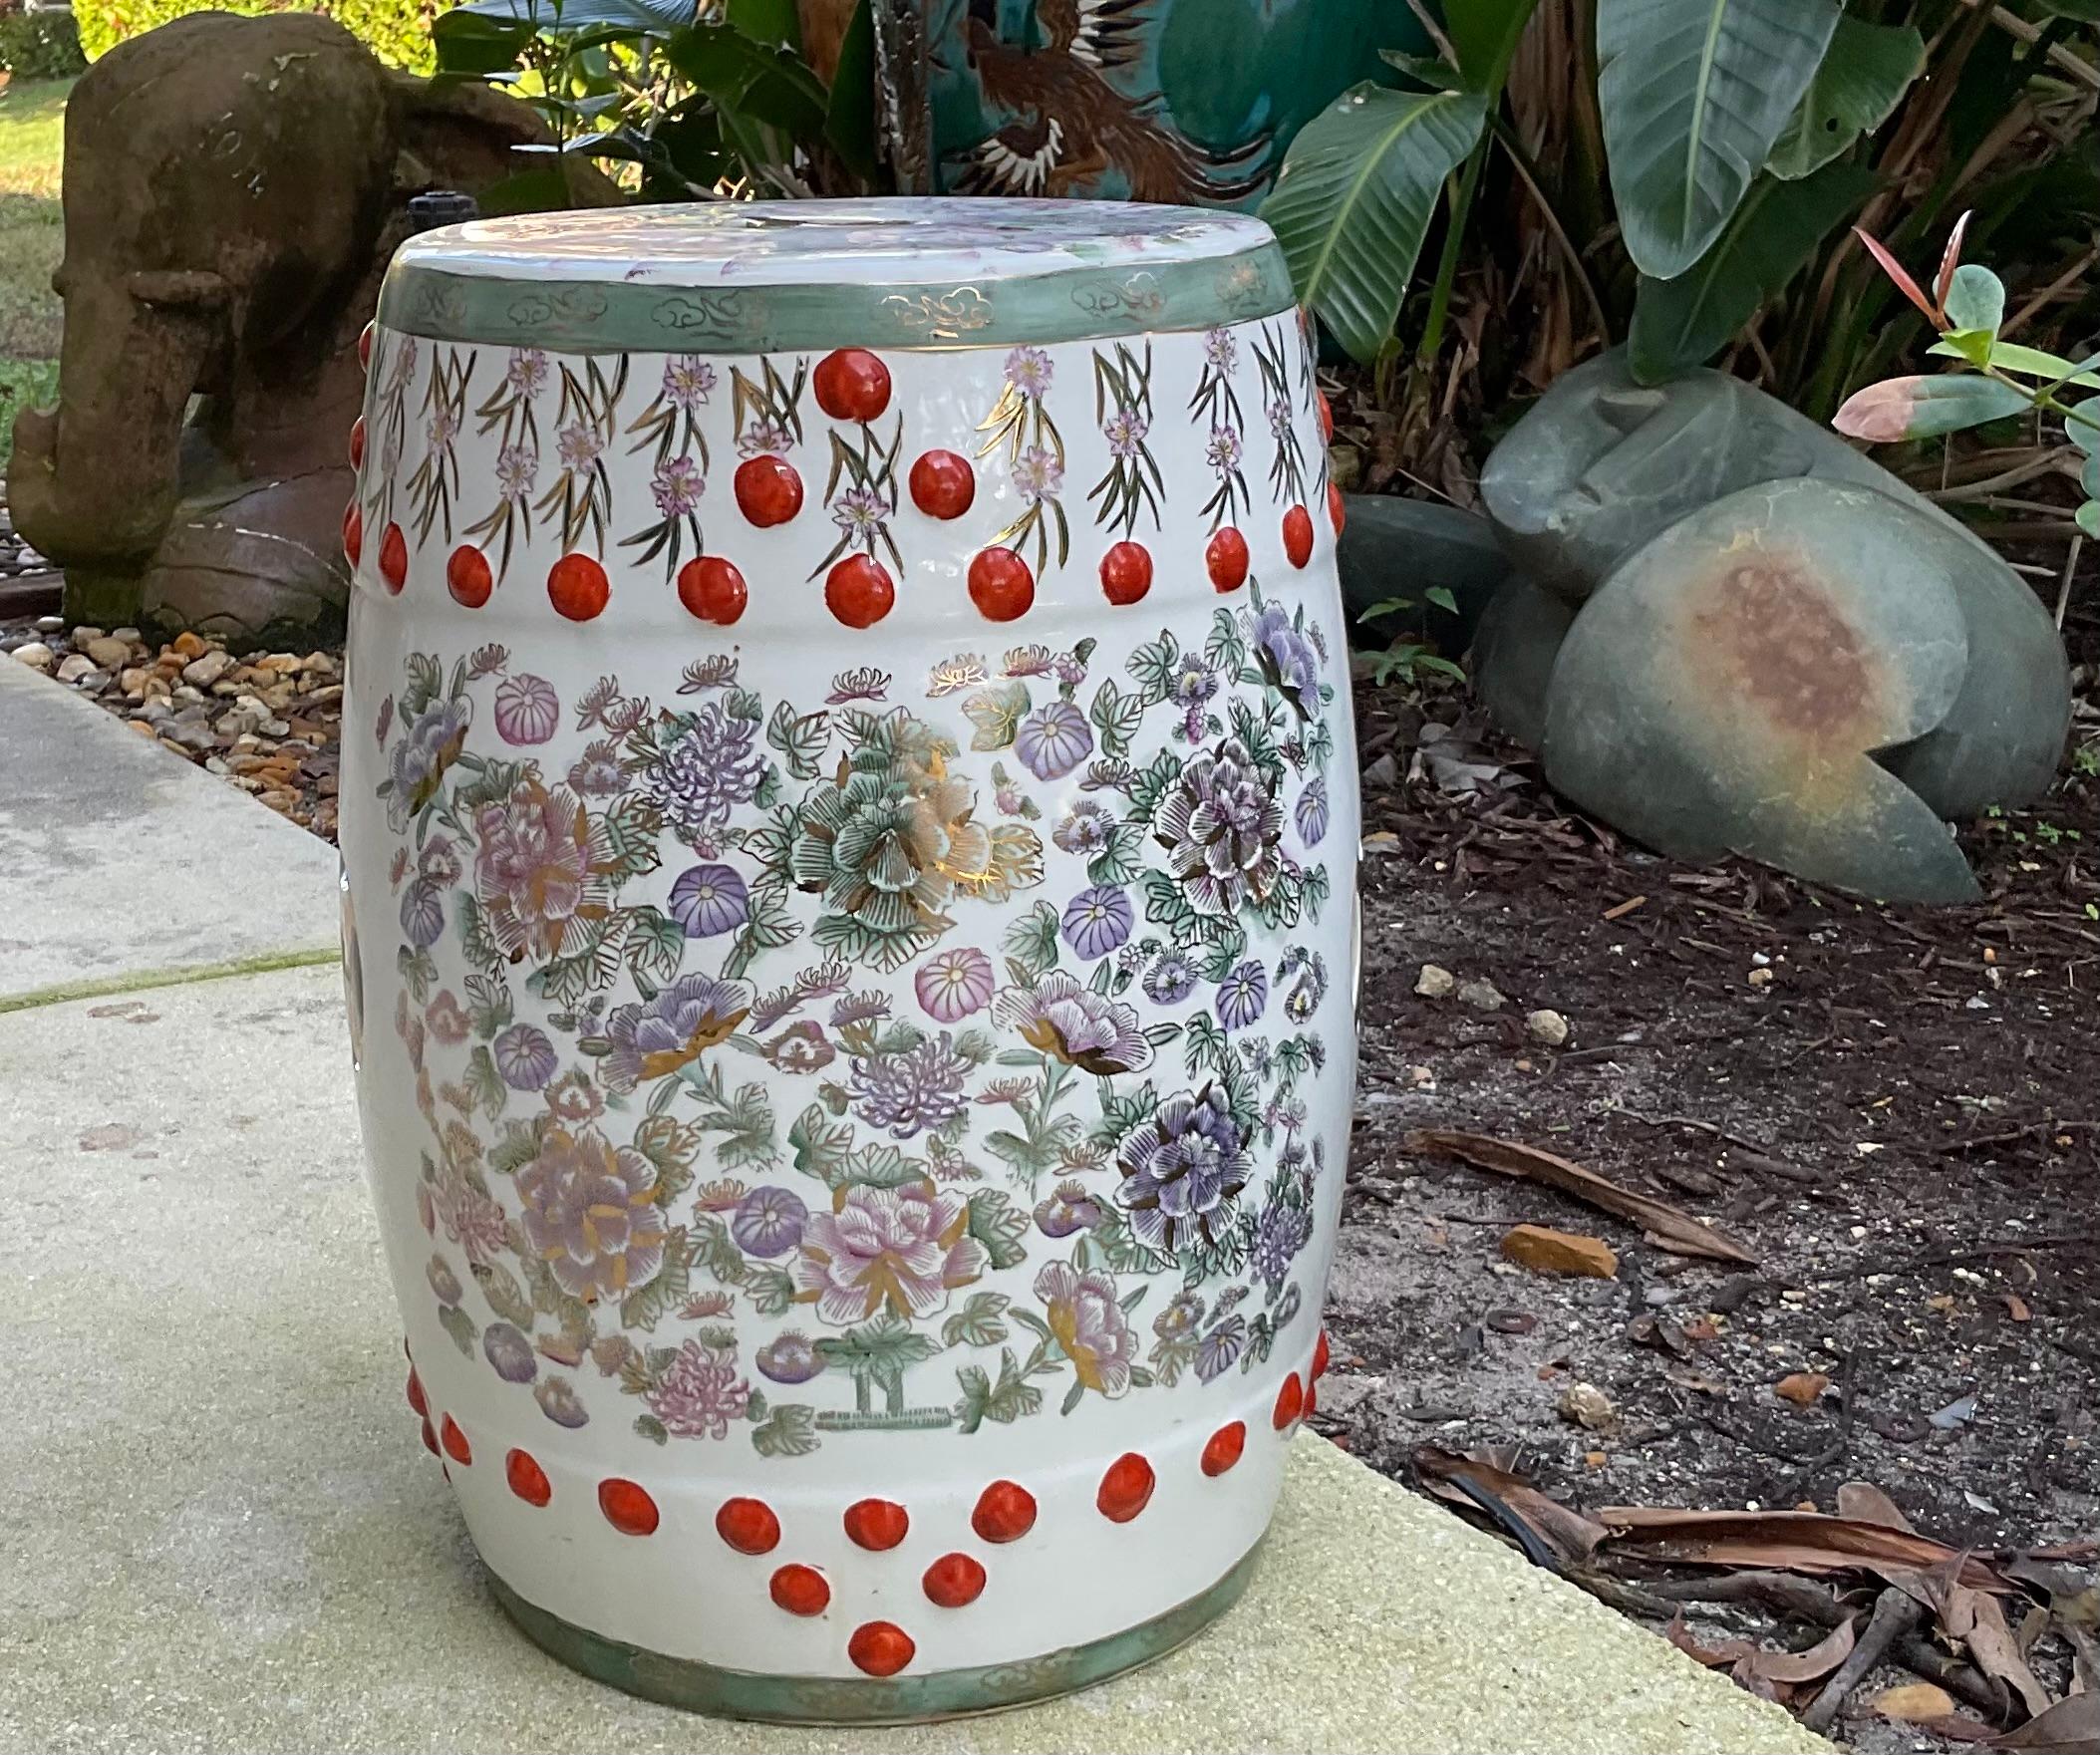 A beautiful  Chinese ceramic garden stool ,Classic barrel shape ,depicting floral garden scenery groups in soft colors. 
Exceptional object of art for display.